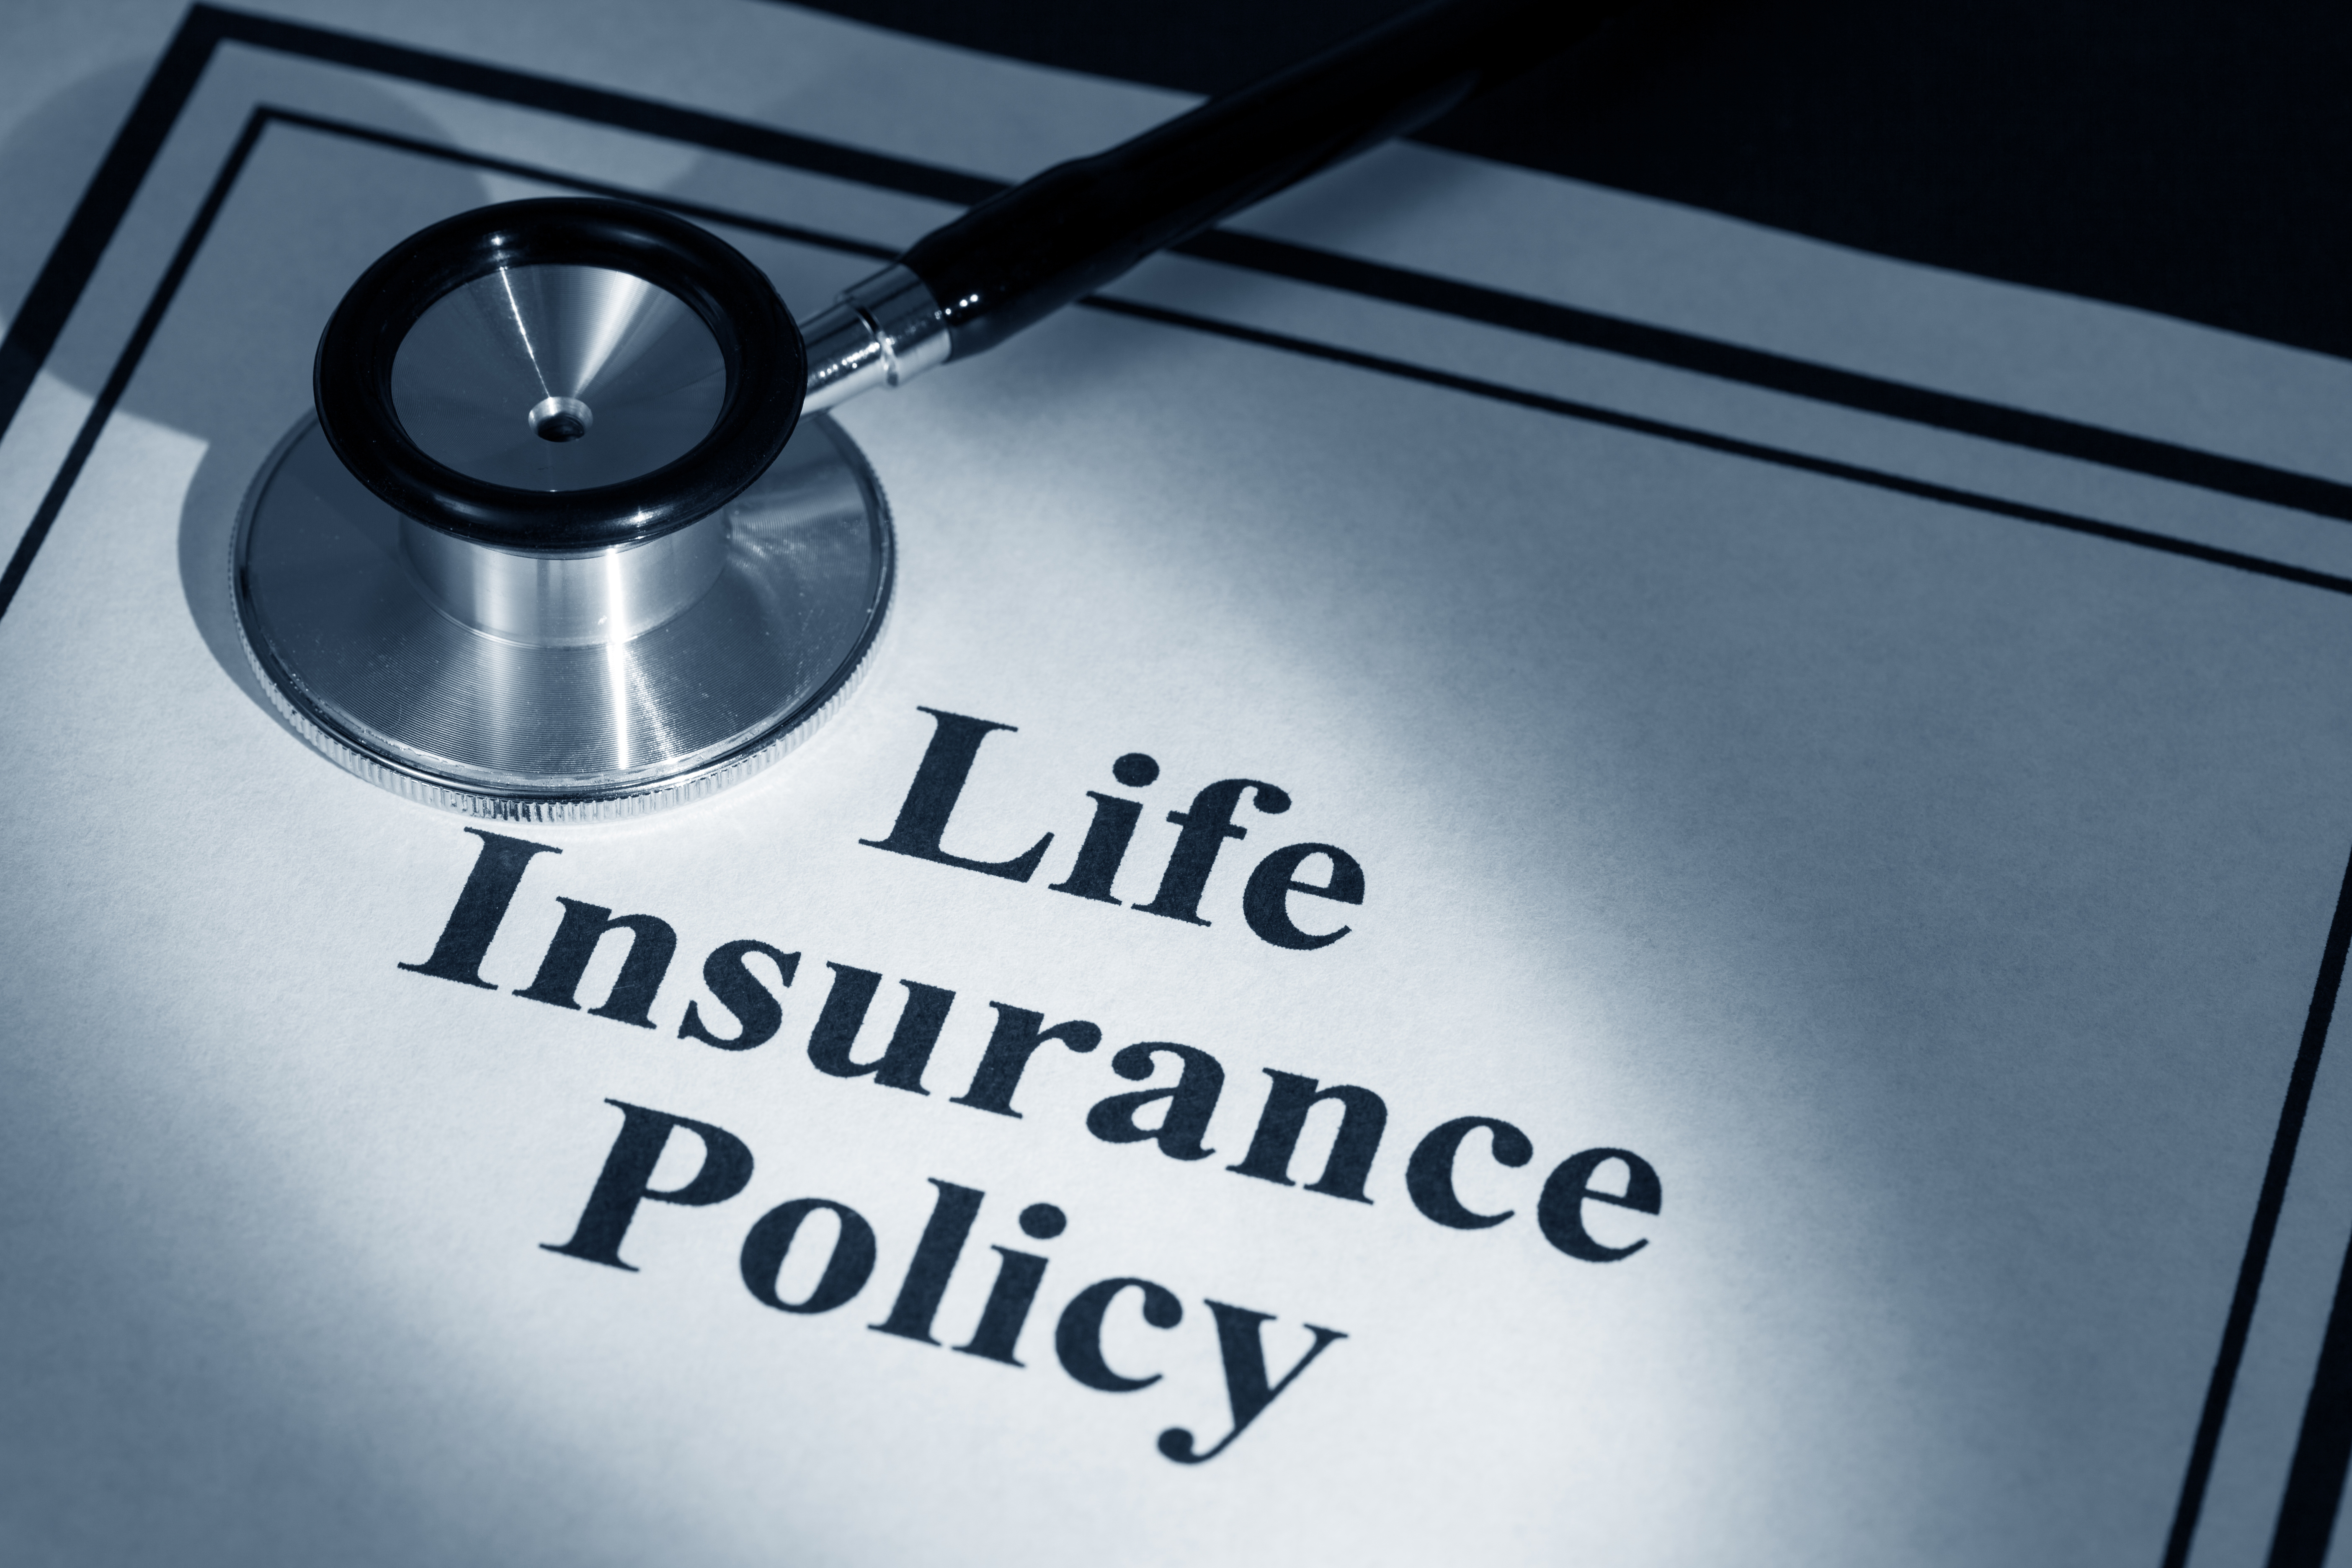 How to Avail Life Insurance Policies? - Life Insurance